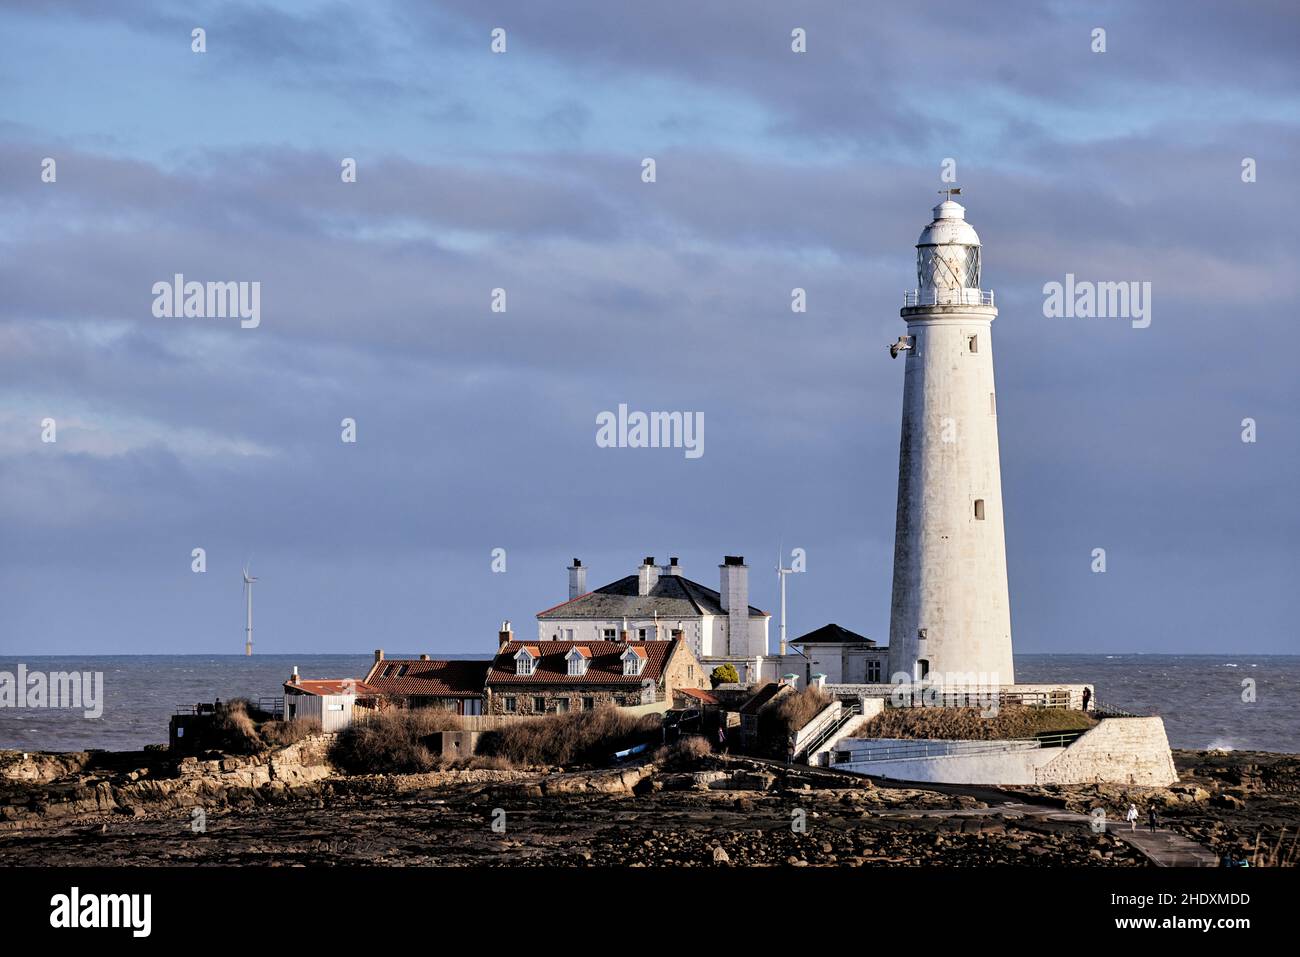 St. Mary's Lighthouse Whitley Bay, ville balnéaire de North Tyneside, Tyne & Wear, Angleterre Banque D'Images